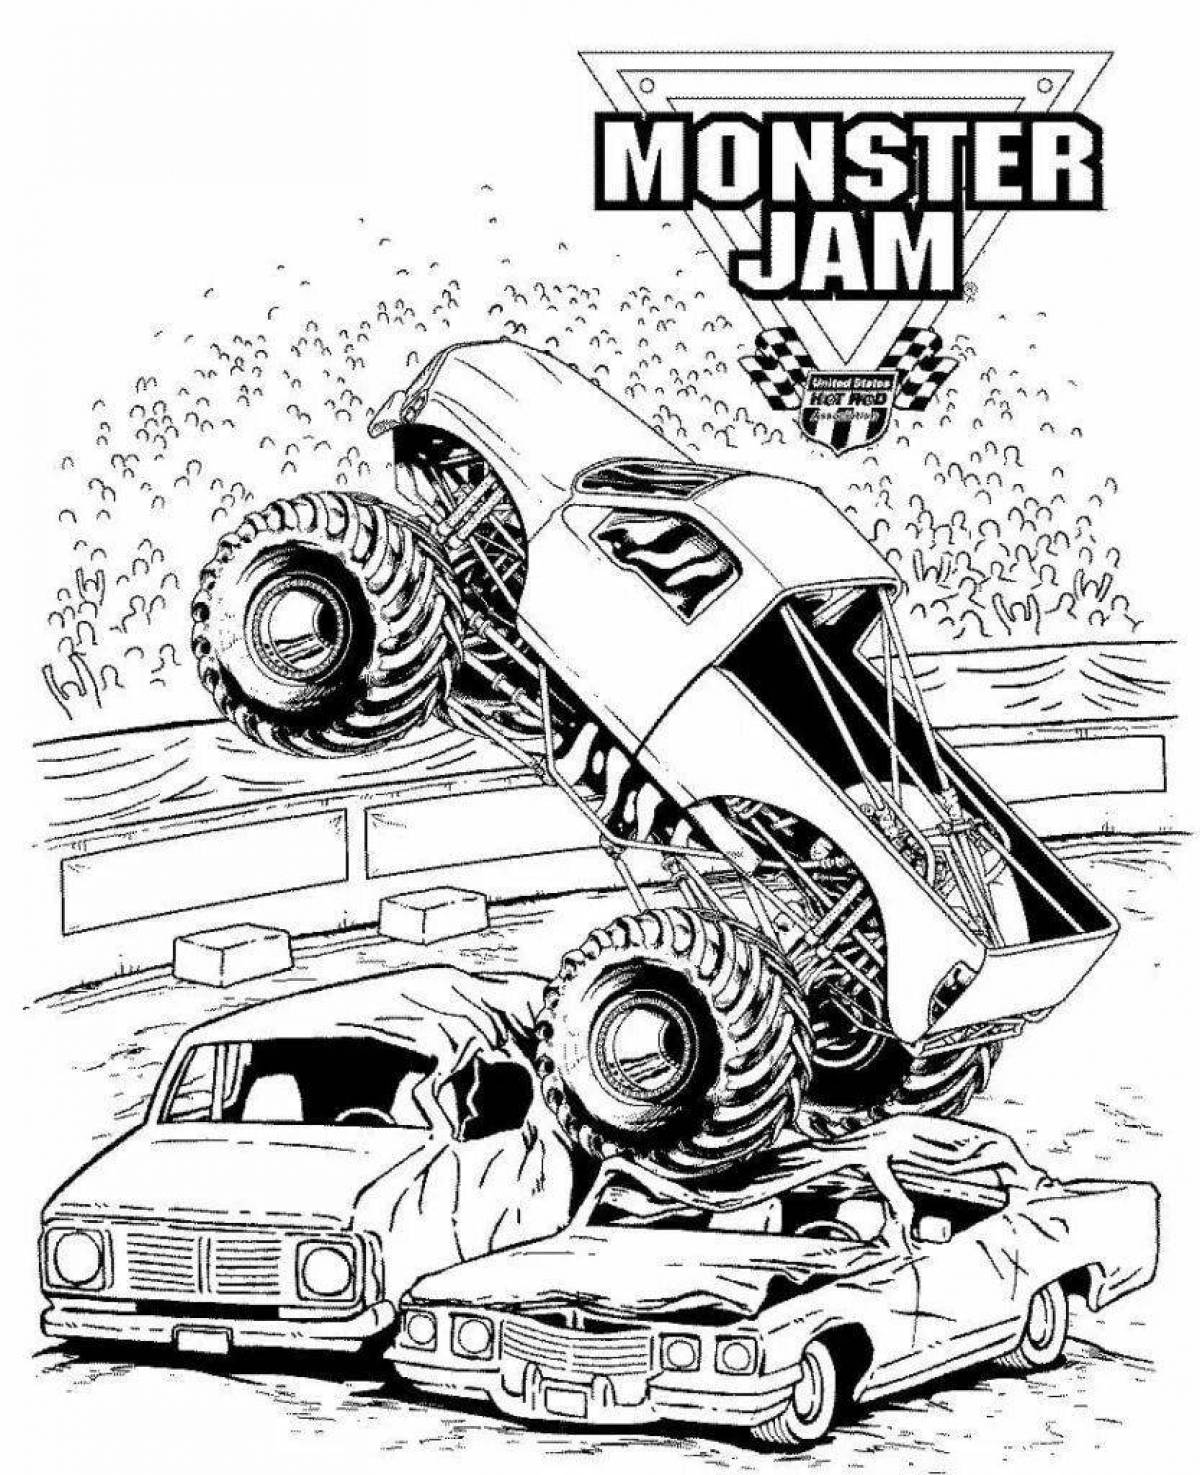 Exquisitely hot wheels monster truck coloring book